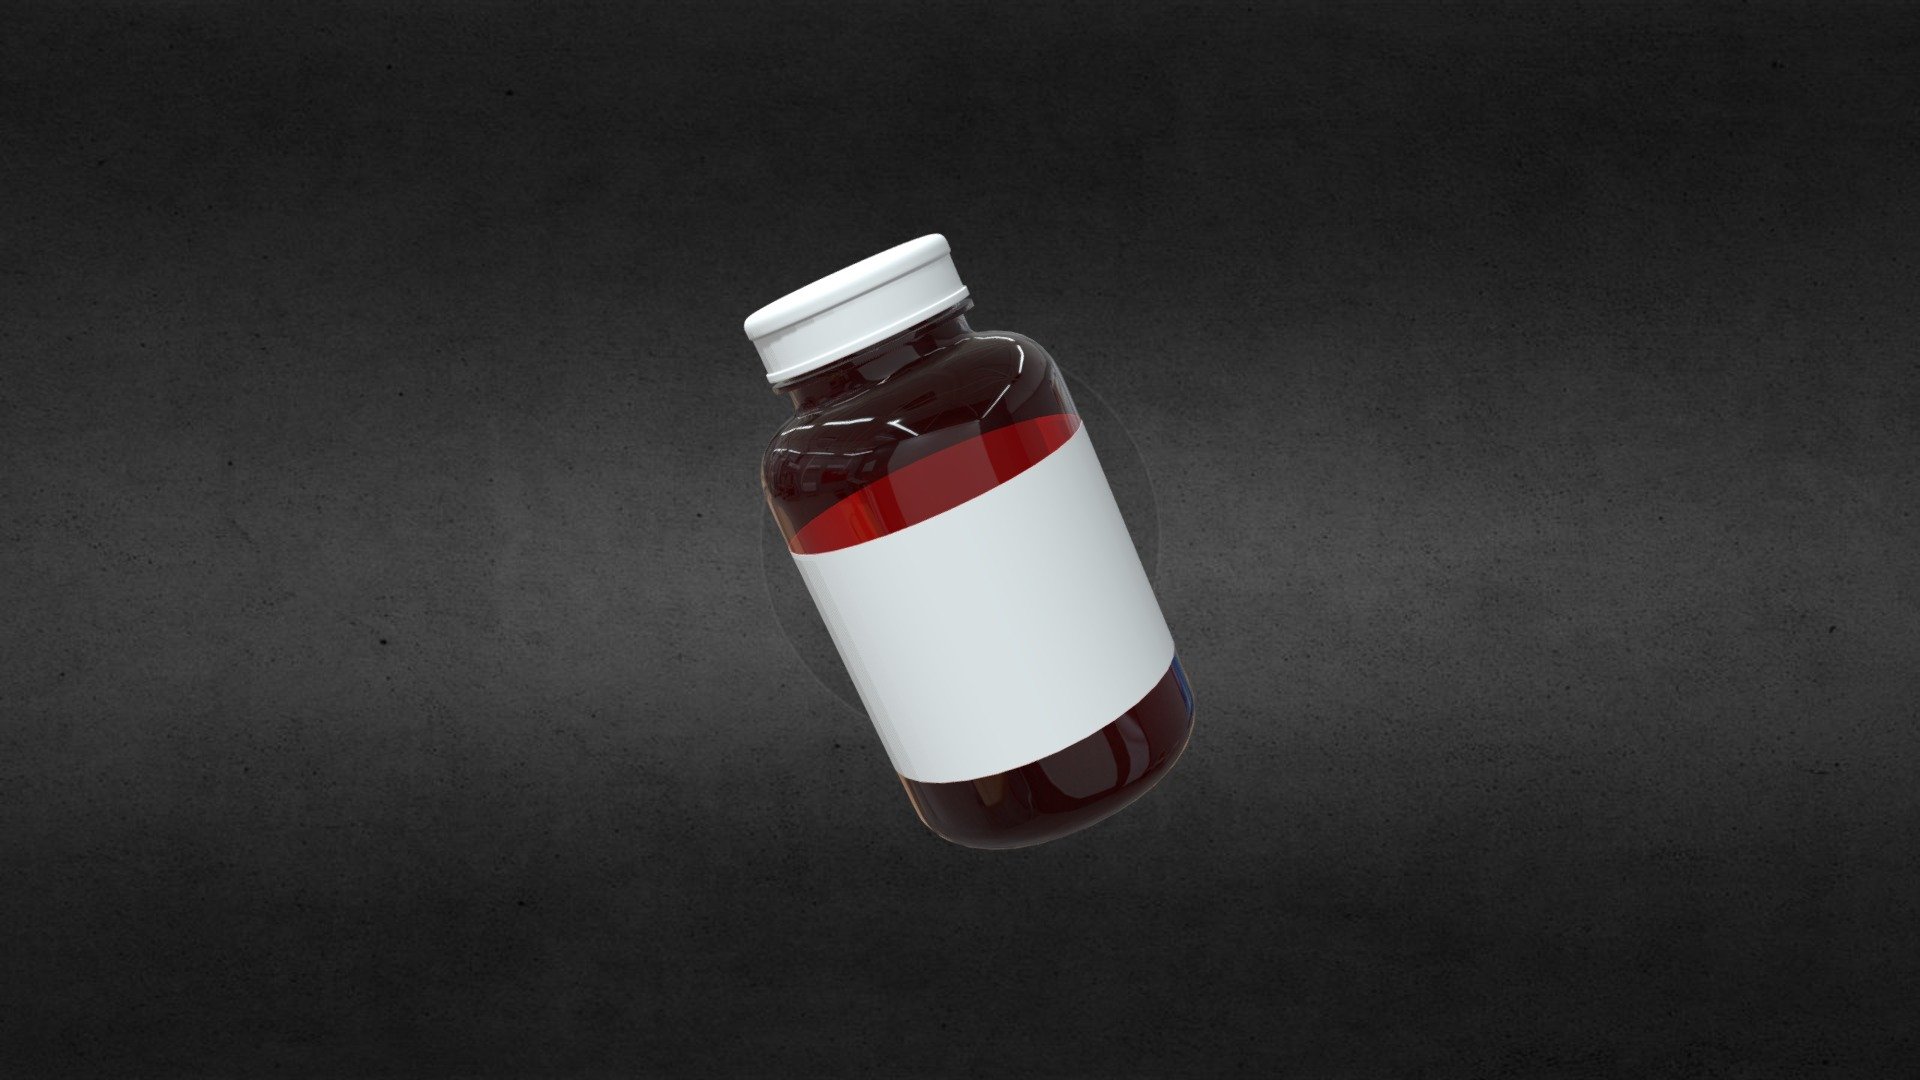 Created a low poly model of an amber glass pill bottle by using Blender. This pill bottle is made of glass, the cup made of plastic and the label made of paper. This is a great piece if you have a laboratory or medical project.

This model was created in a way to make it look like a real amber glass pill bottle. Preview images were rendered with Blender Eevee.

Polygon Count


Faces: 7.648
Vertices: 7.588

Pack Includes &amp; File Format


Blender file v3.2.2 (.blend): Amber Glass Pill Bottle.blend
FBX file: Amber Glass Pill Bottle - FBX
OBJ file: Amber Glass Pill Bottle - OBJ
STL file: Amber Glass Pill Bottle - STL
DAE file: Amber Glass Pill Bottle - DAE
ABC file: Amber Glass Pill Bottle - ABC
glTF file: Amber Glass Pill Bottle - glTF
Three Material
NO Textures

Images of product with textures:

https://www.artstation.com/artwork/ZemAvx

Note: Not printable model and I stongly advice not to purchase it with the intent of printing it.

Enjoy the product and leave a comment 3d model